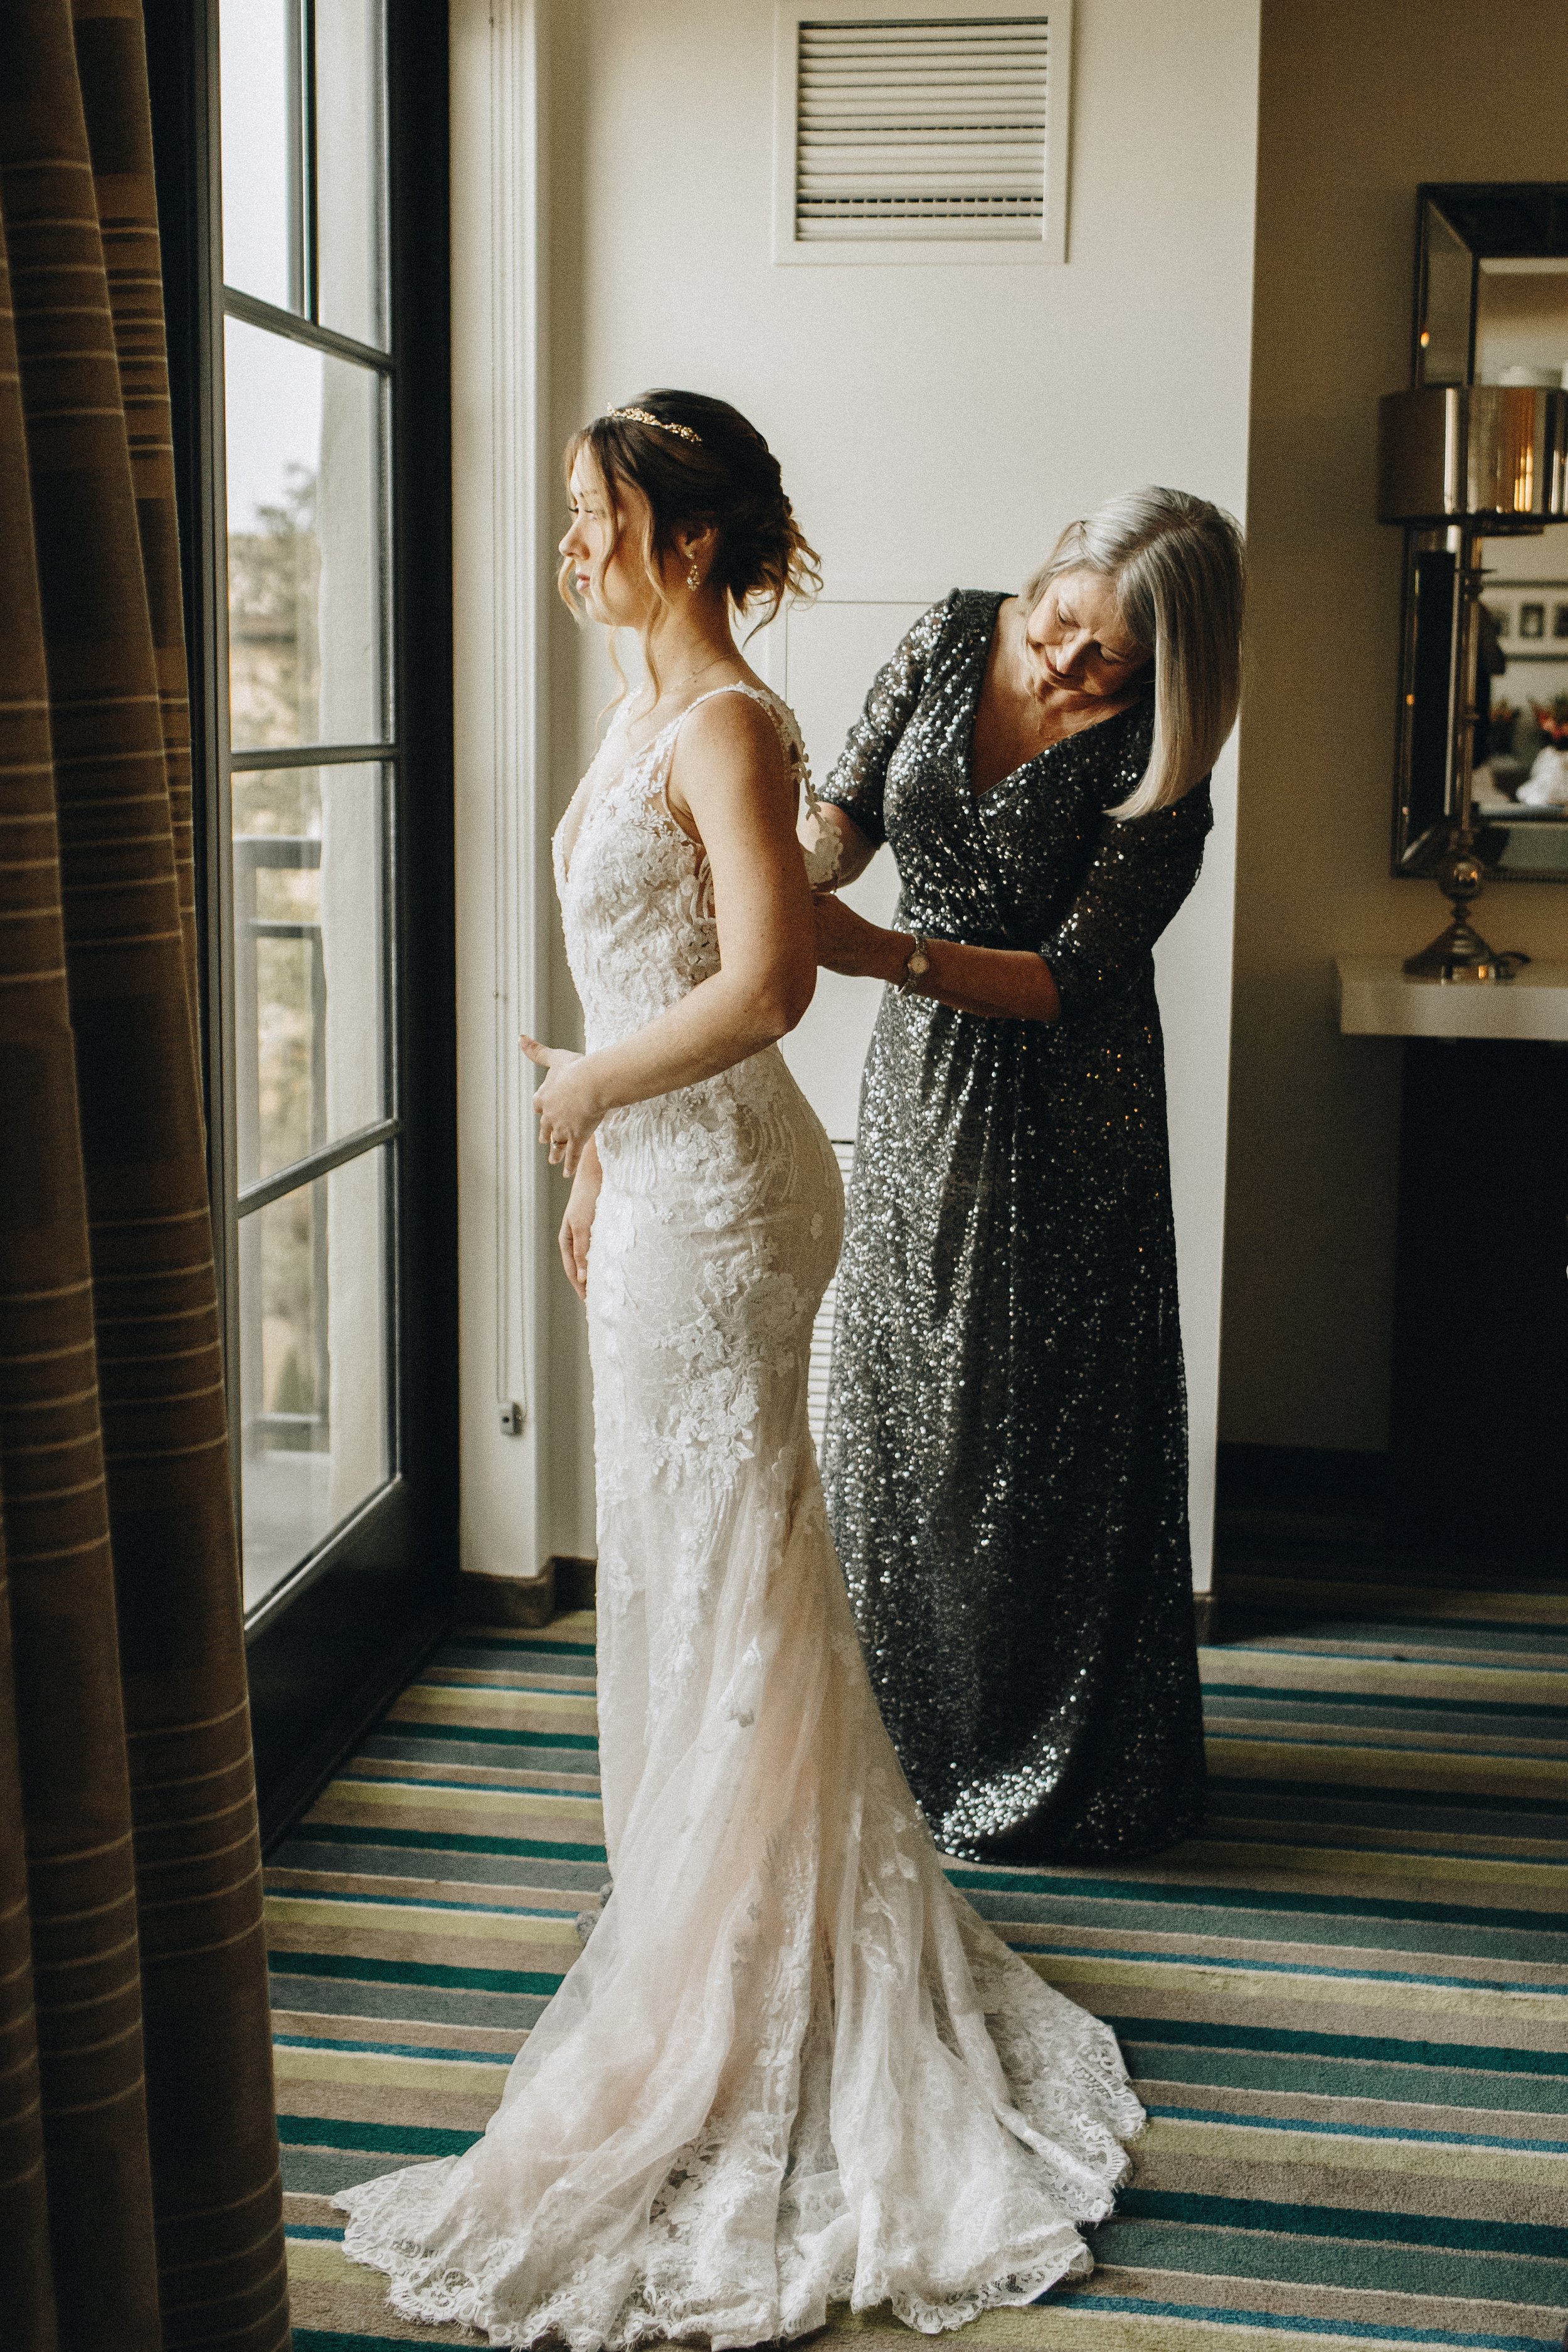 45 Mother of the Bride Dresses and Shopping Tips from a Stylist